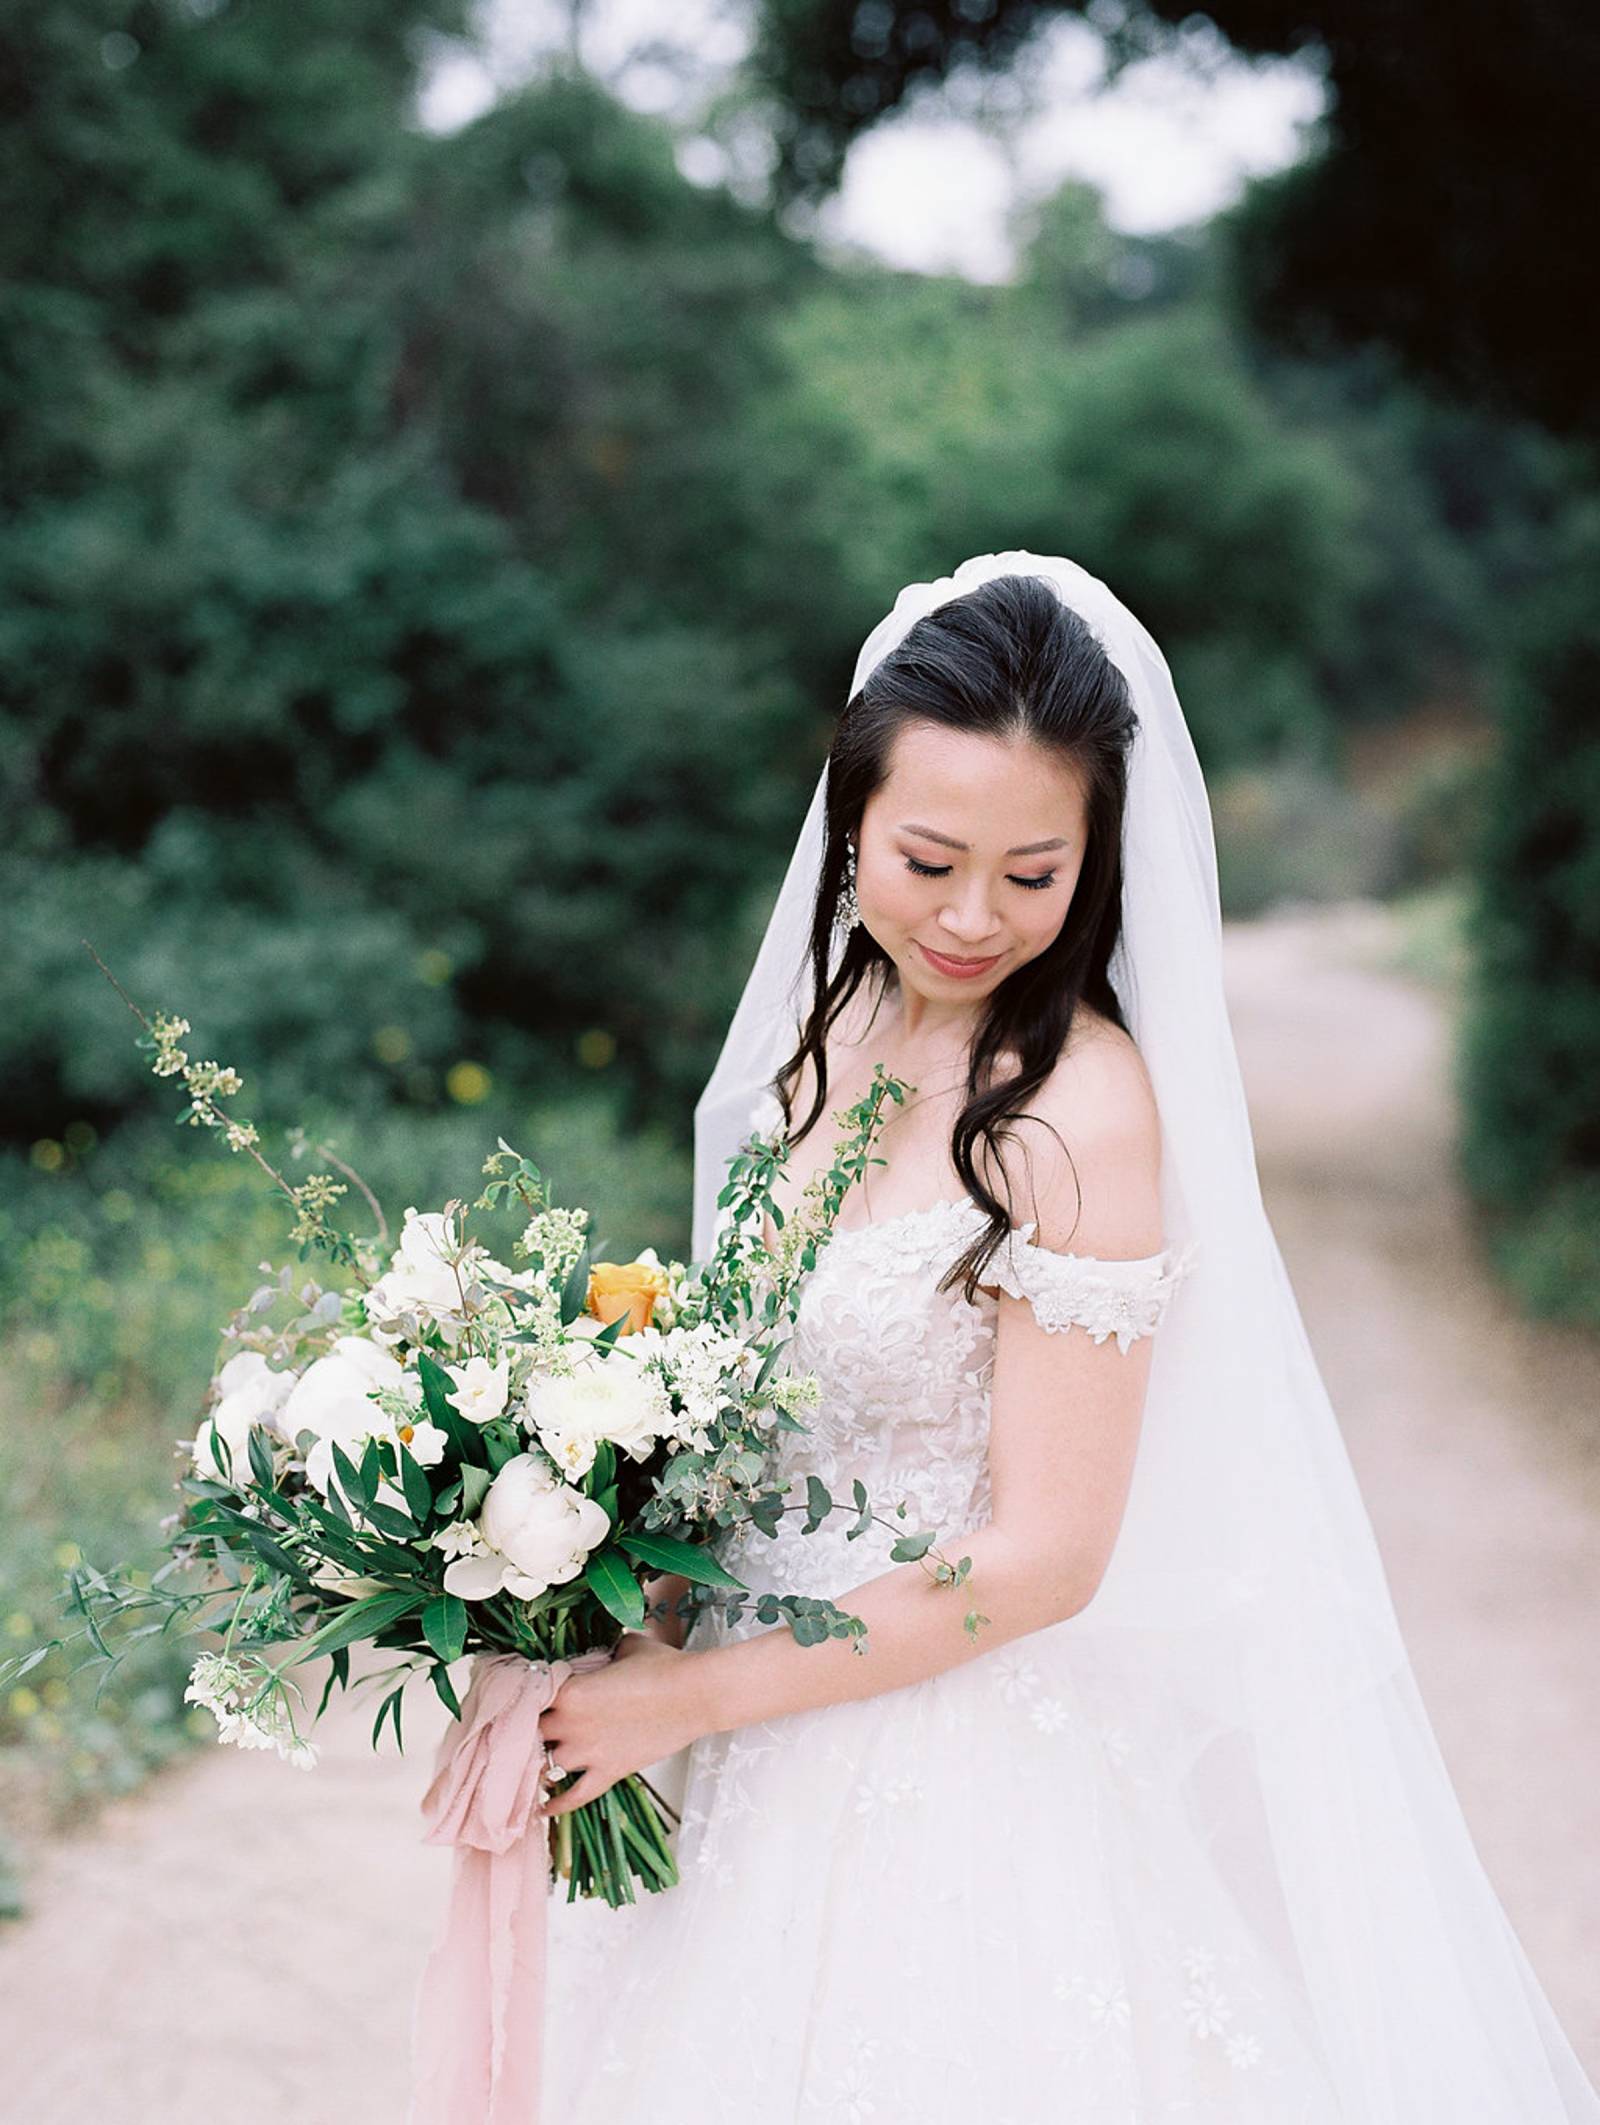 Southern California Country Club Wedding blending modern touches with ...